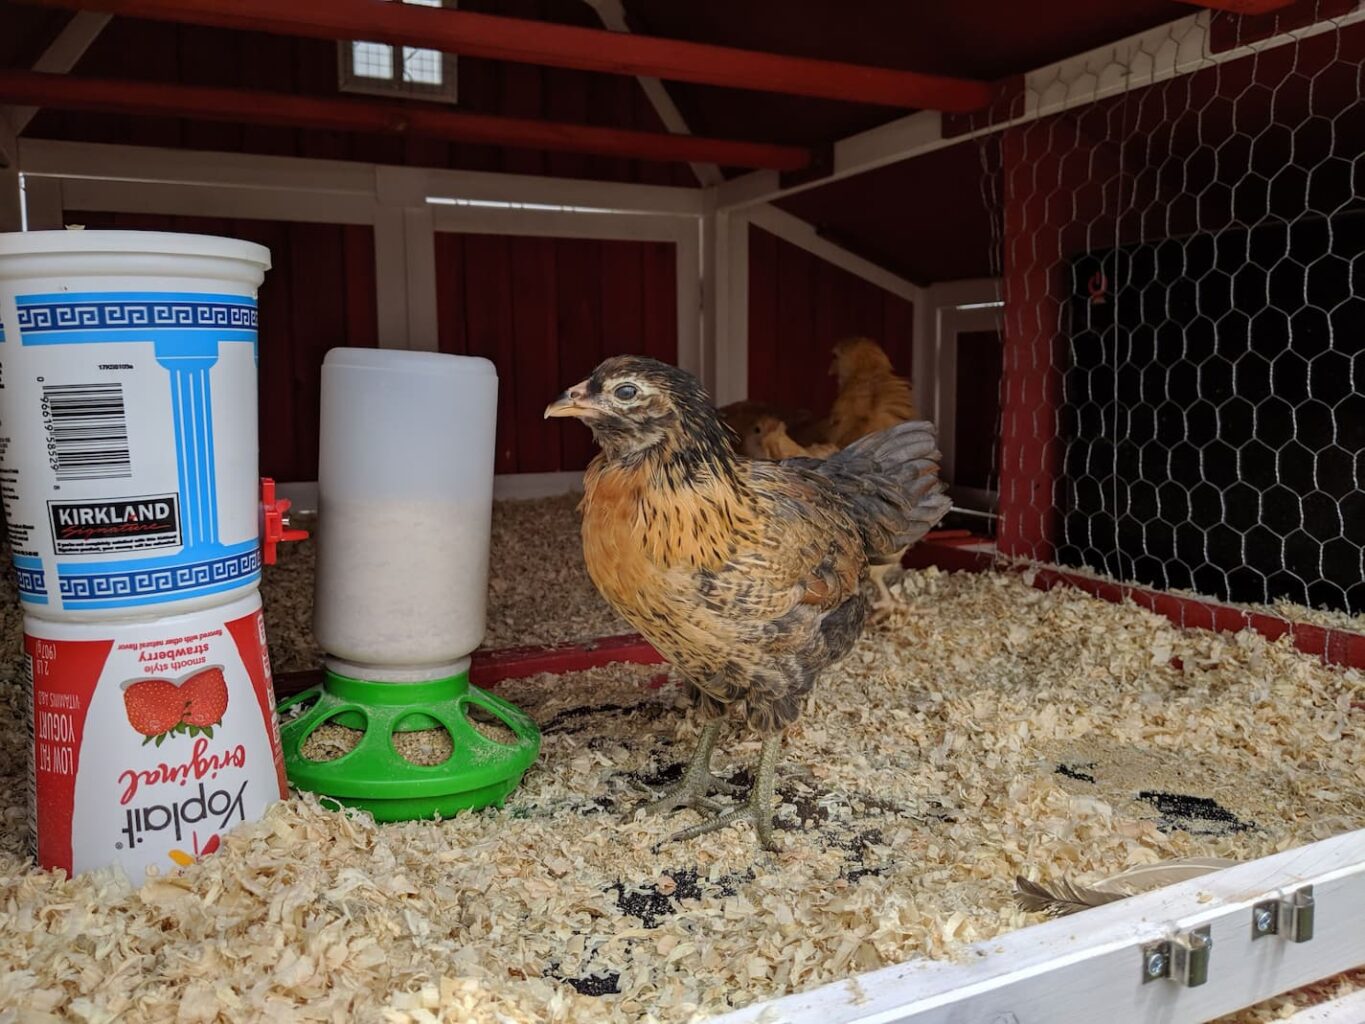 An image of our chicken named Hey-Hey inside the coop.